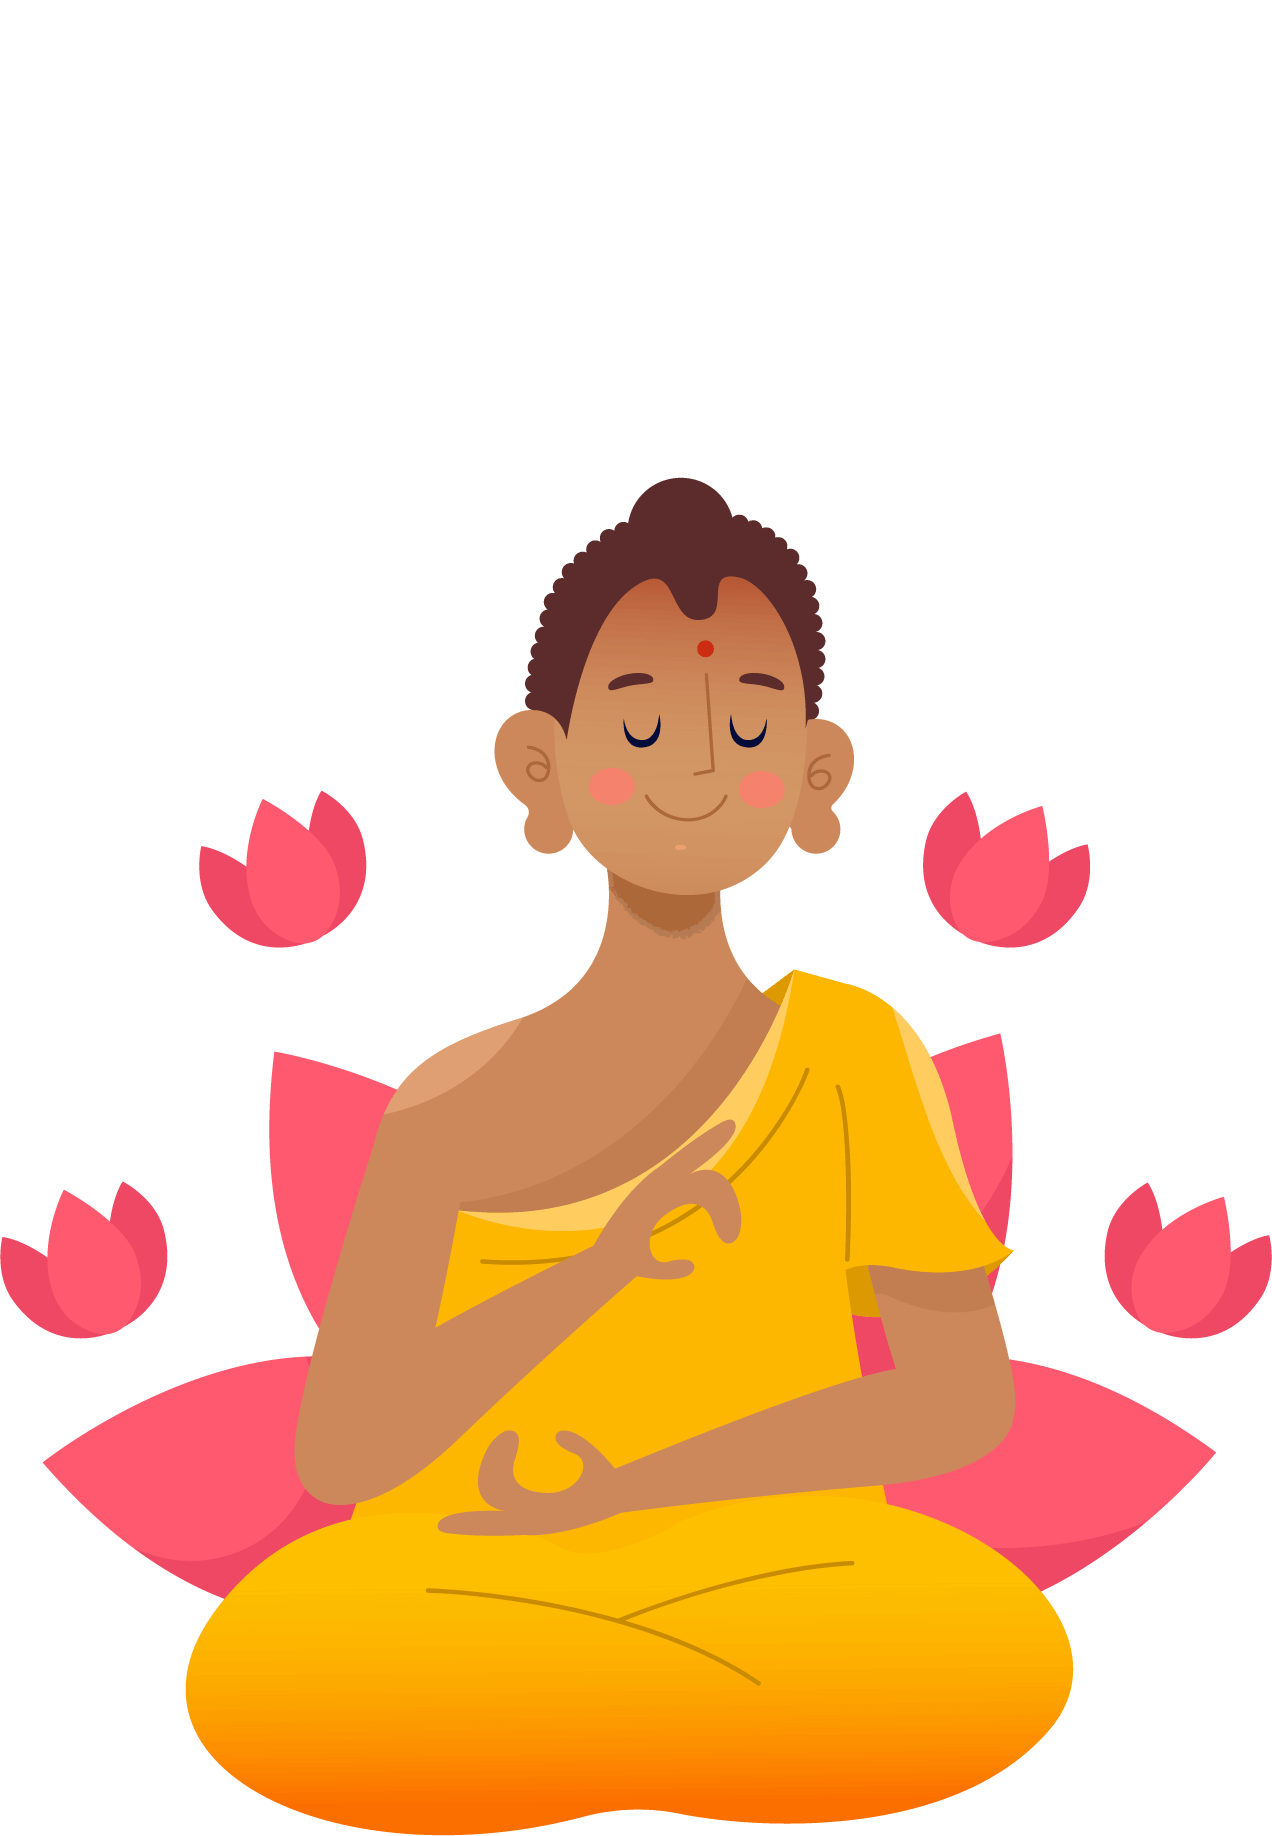 Vesak day with monk and lotus - Pngfreepic vector - clipart - illustration